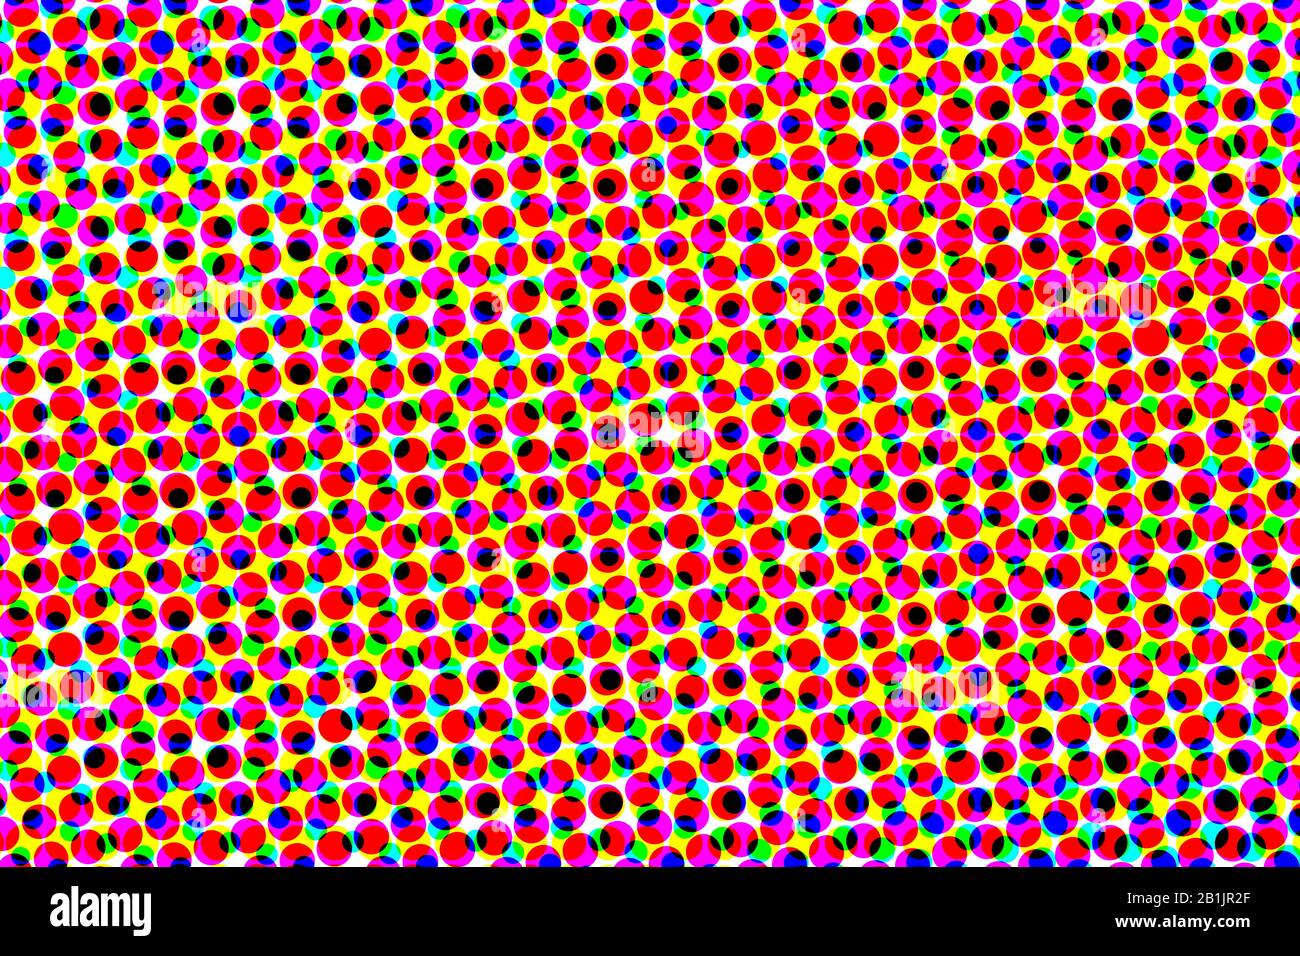 blue white red and yellow halftone pattern. colorful halftone background and texture. illustration. Stock Photo